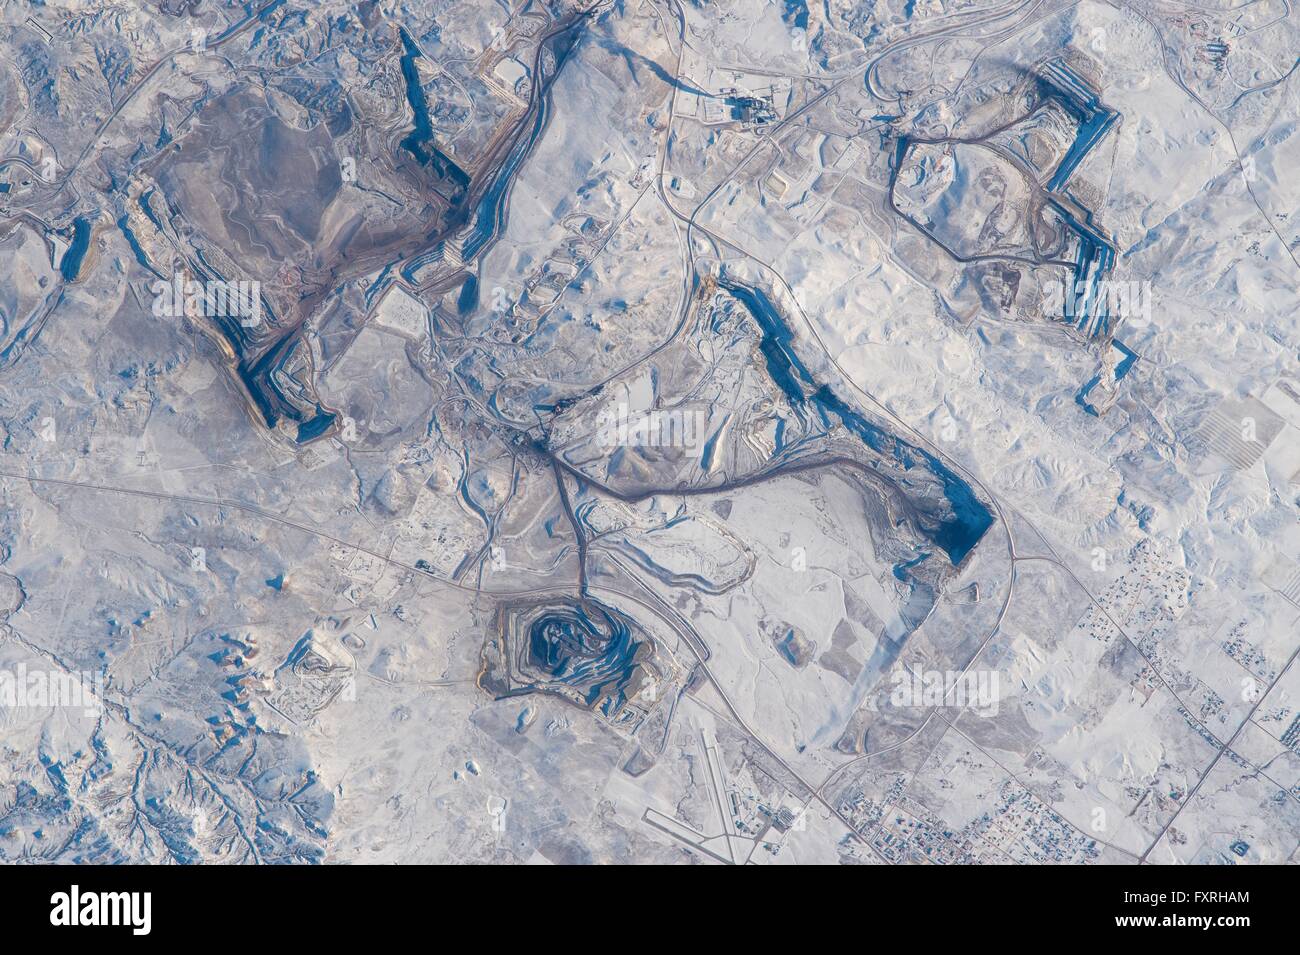 International Space Station view looking down from space at open-cast pits of several coal mines that operate out of the small town of Gillette, Wyoming contrasted agains the wintery snow covered landscape of the Bighorn Mountains. Stock Photo